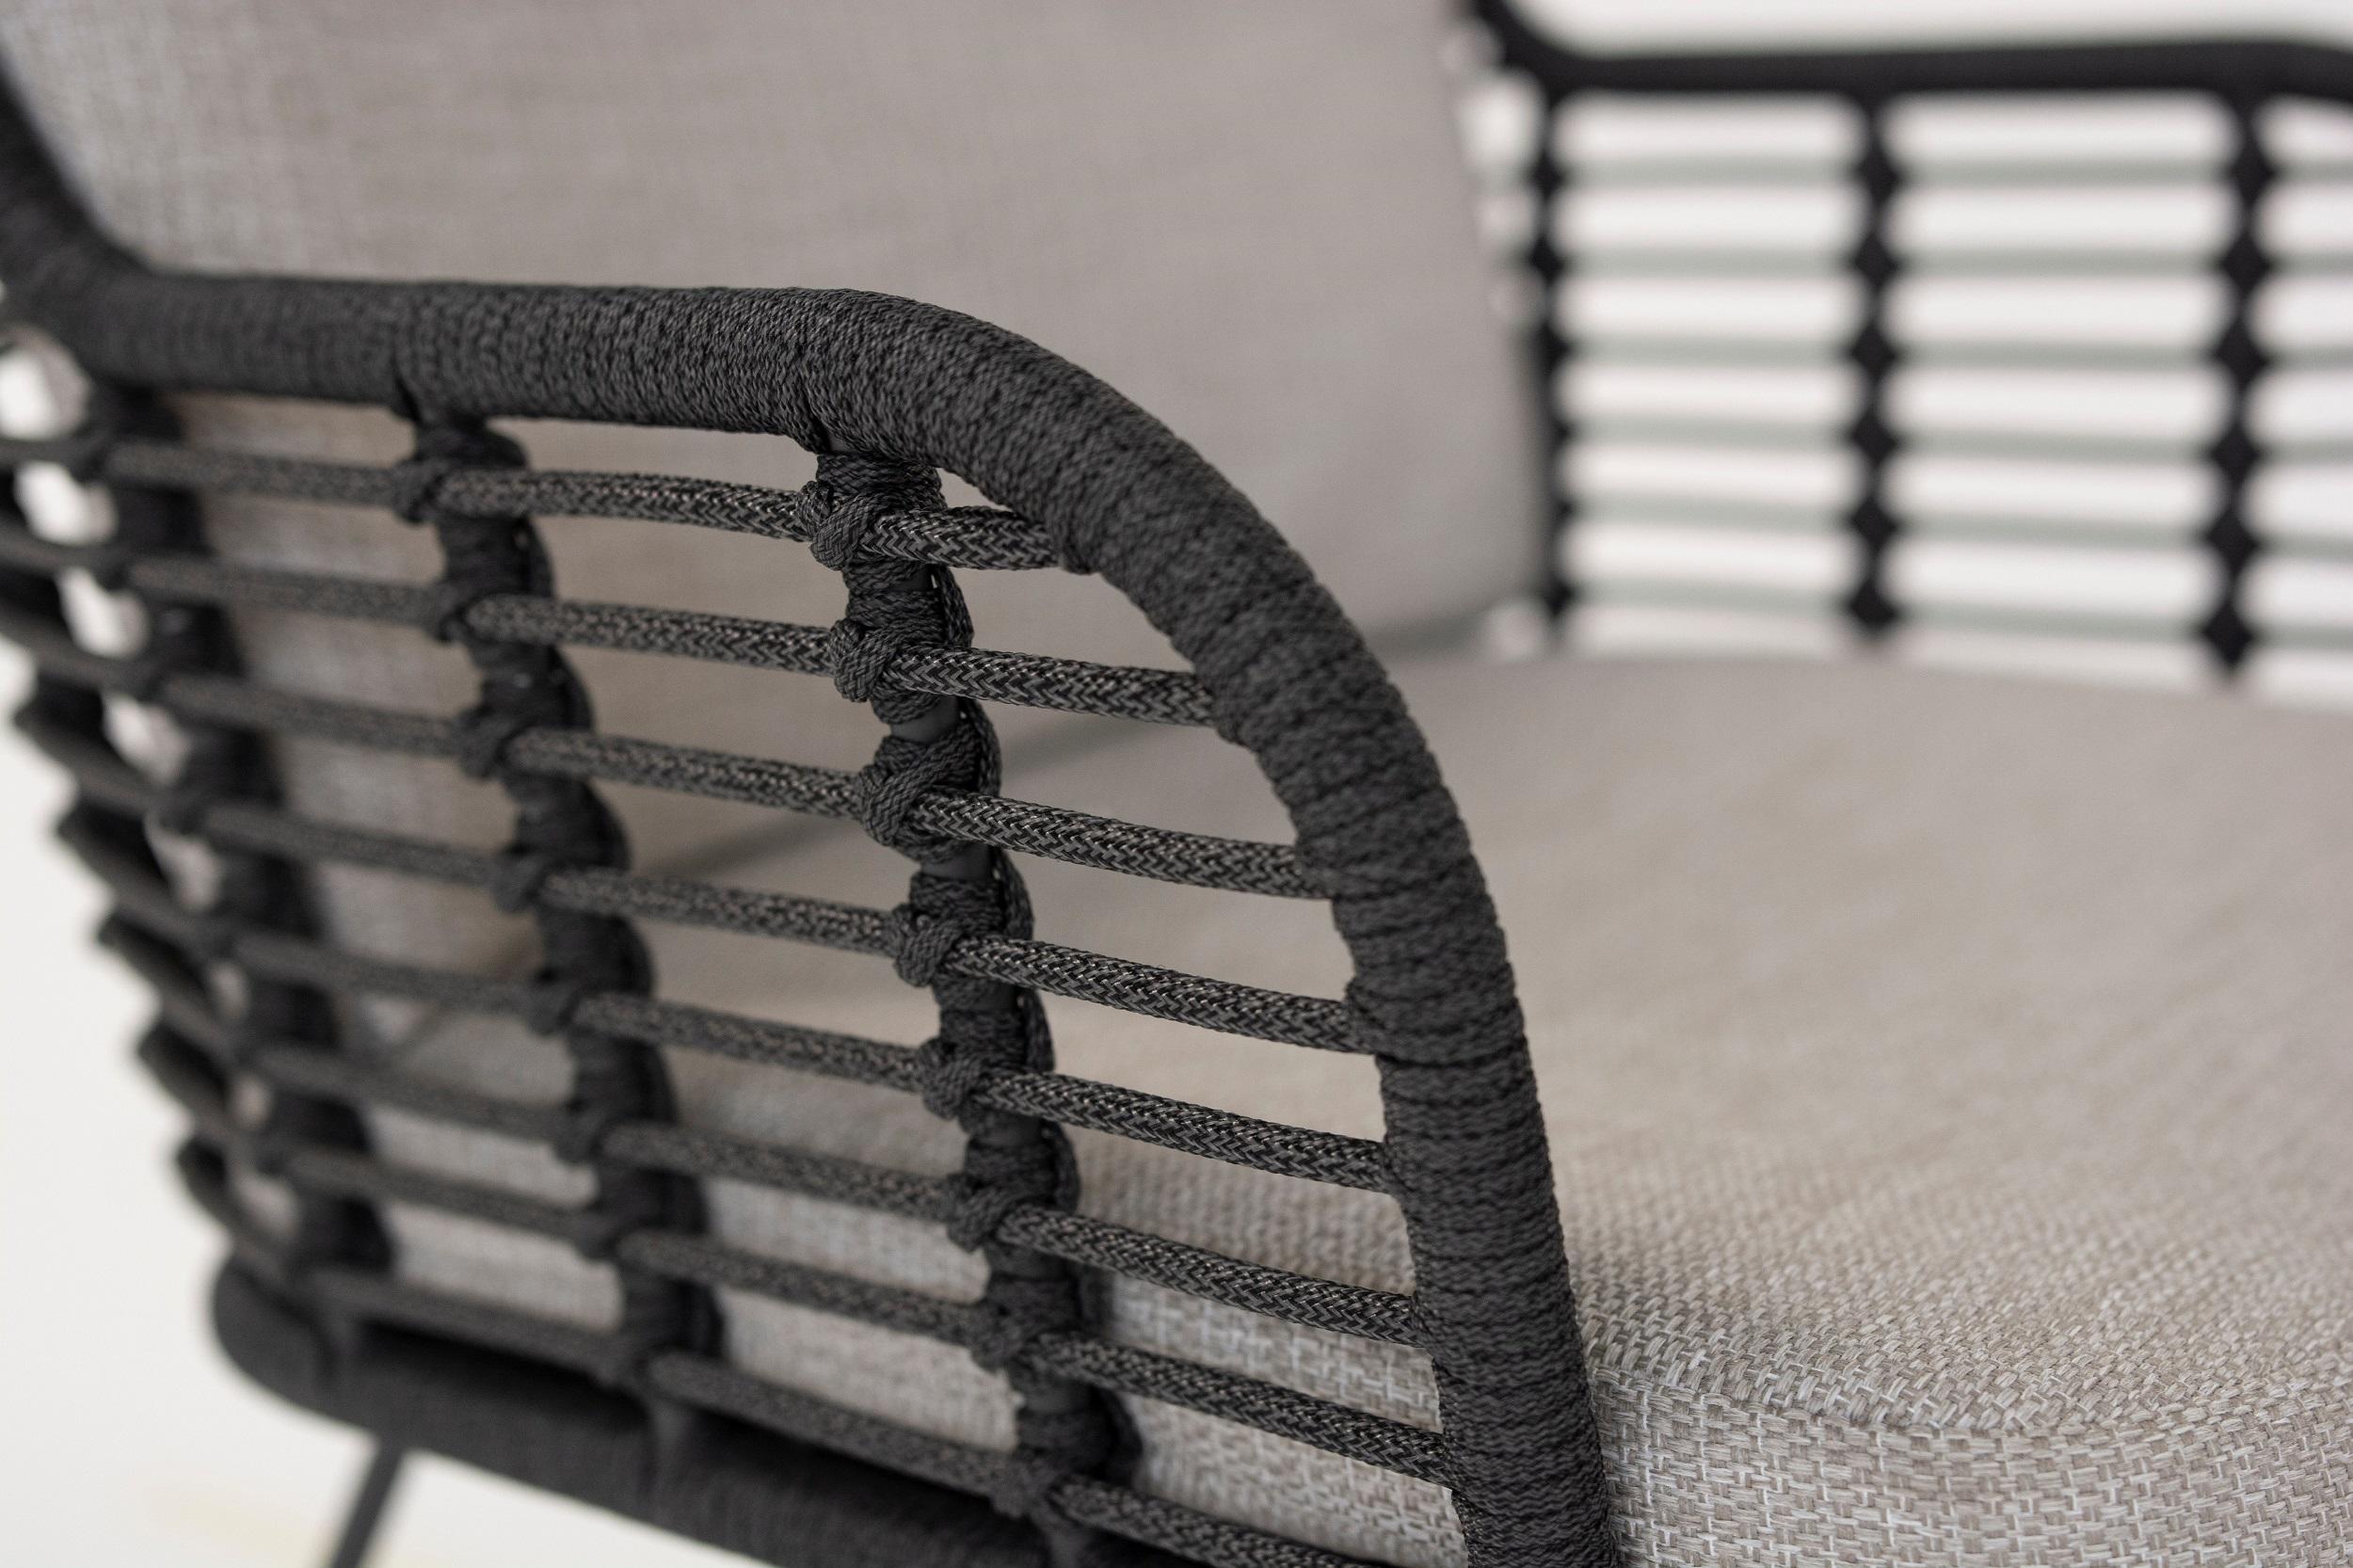 rope weave detail of modern garden patio dining chair with stainless steel slimline frames and light grey all weather cushions